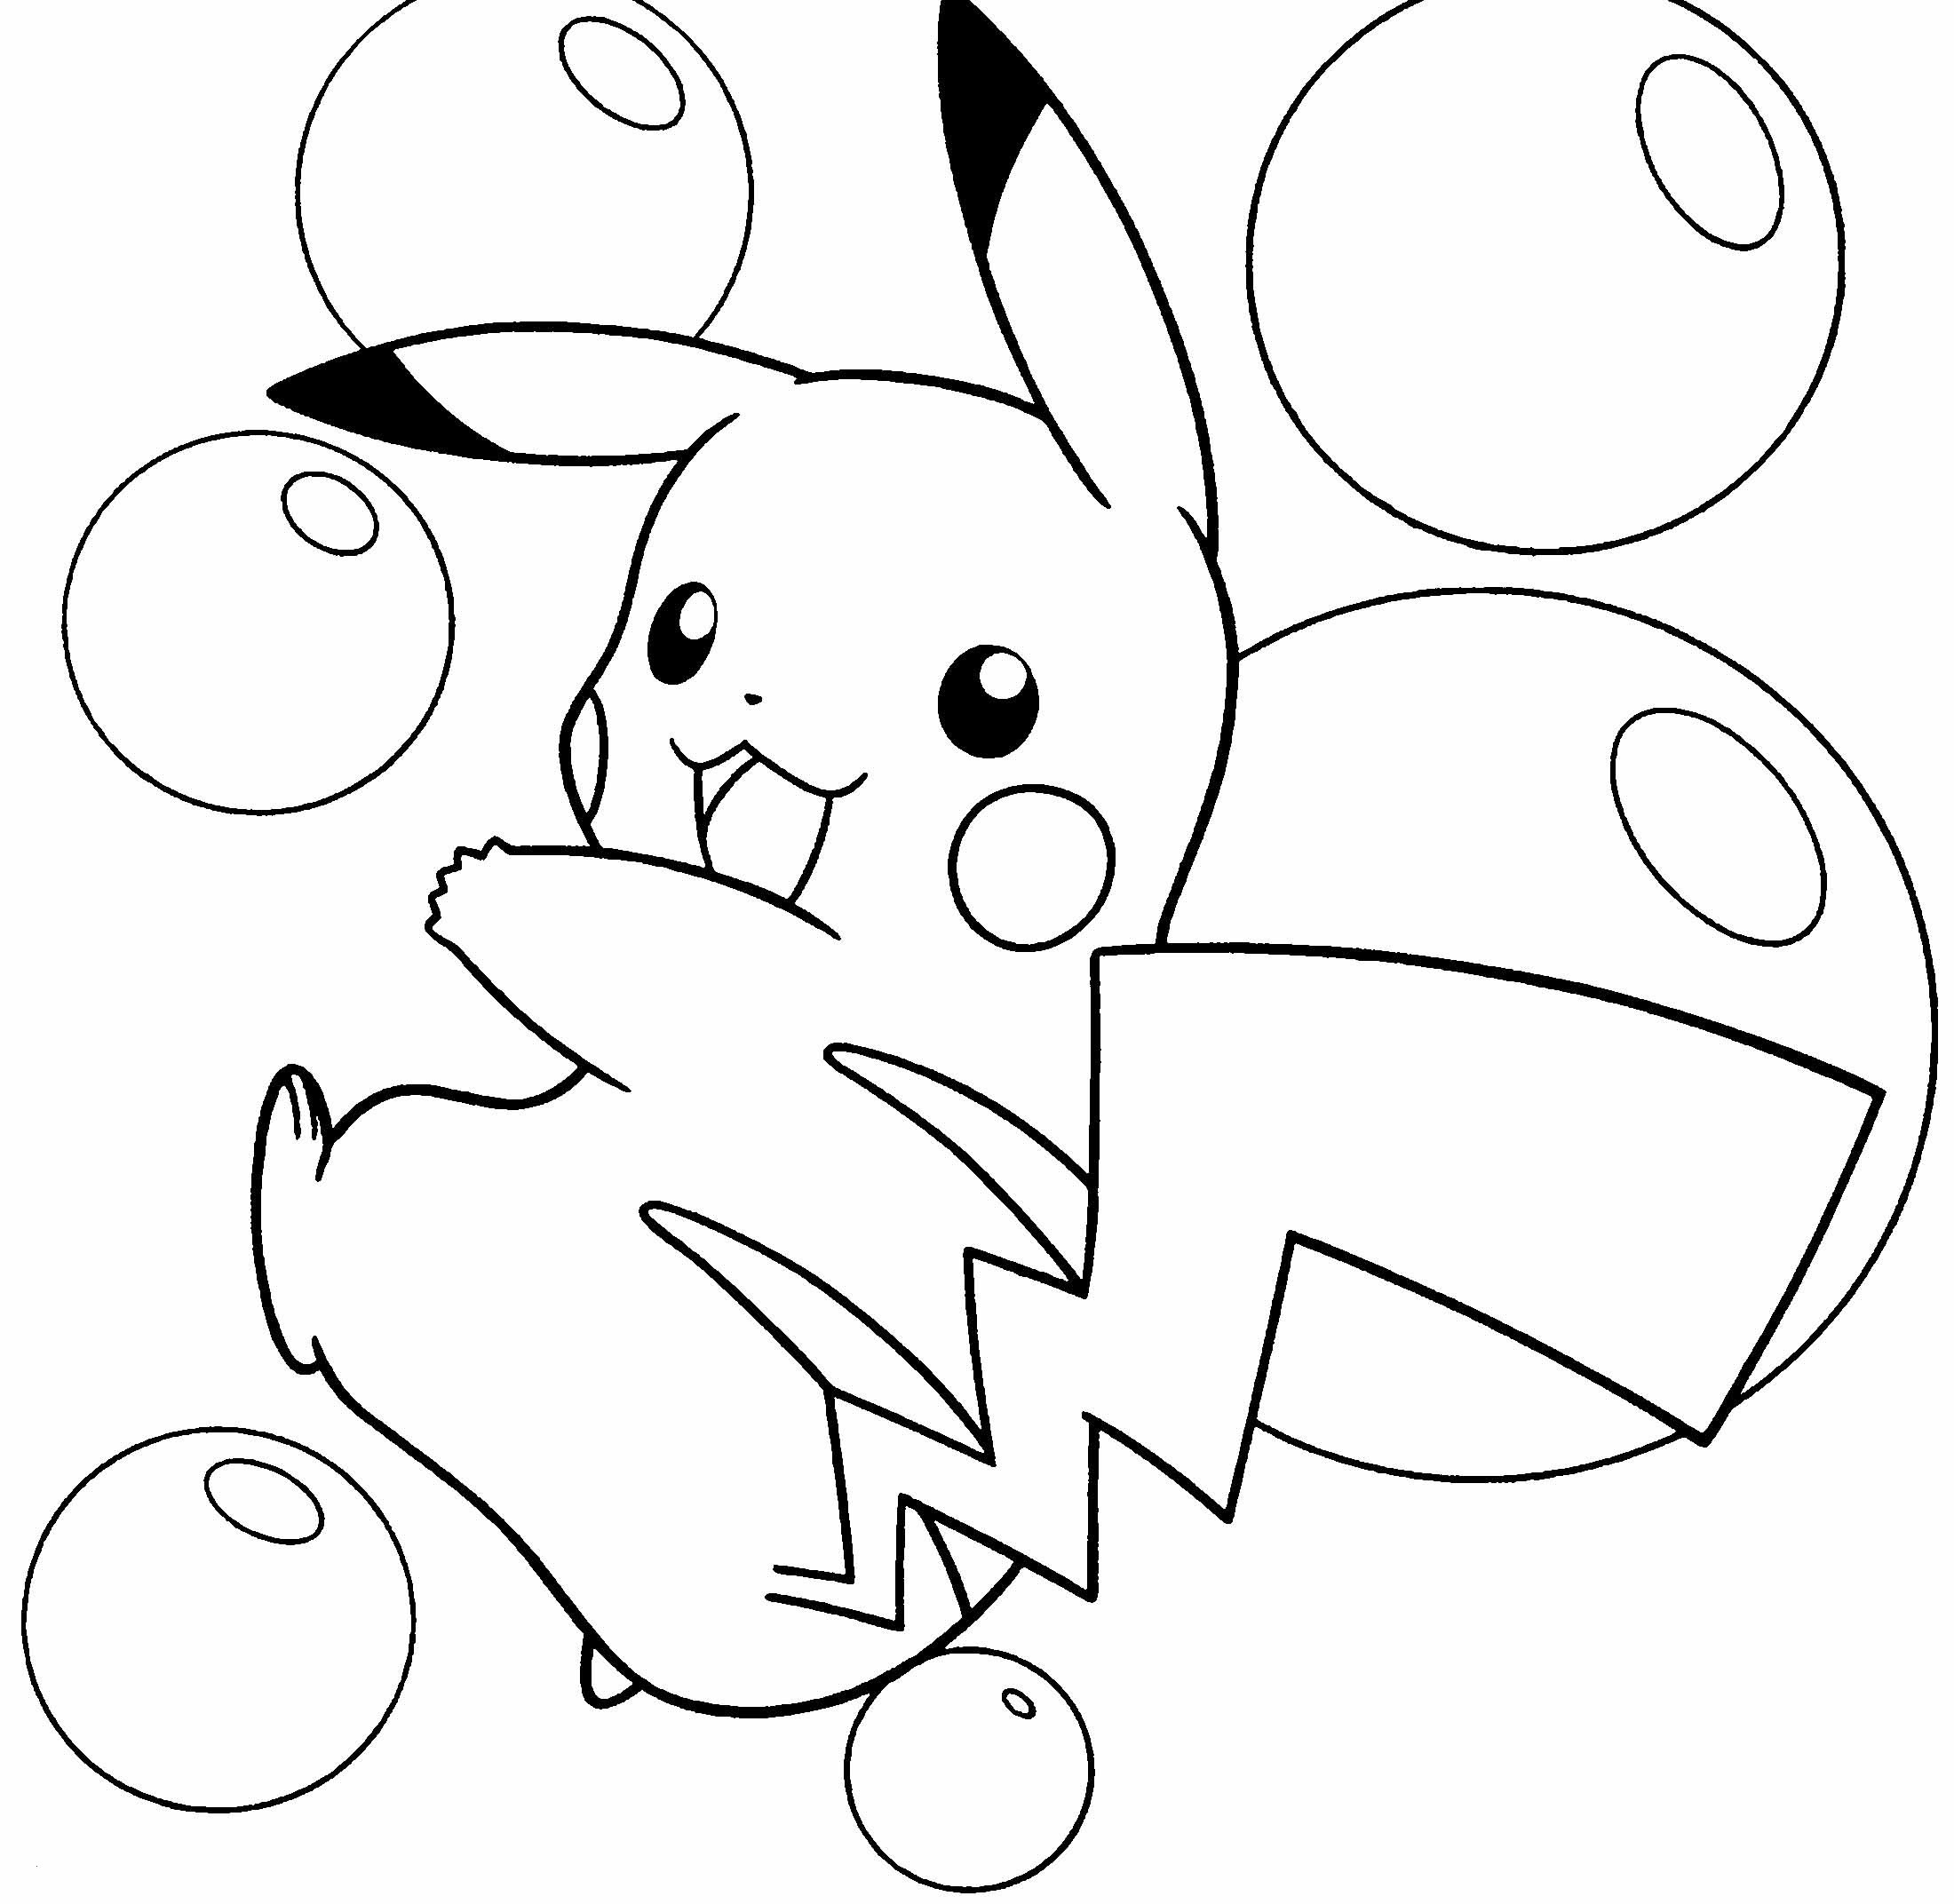 Pikachu Coloring Pages Nice Pokemon Coloring Pages Free Beautiful Pikachu Coloring Page